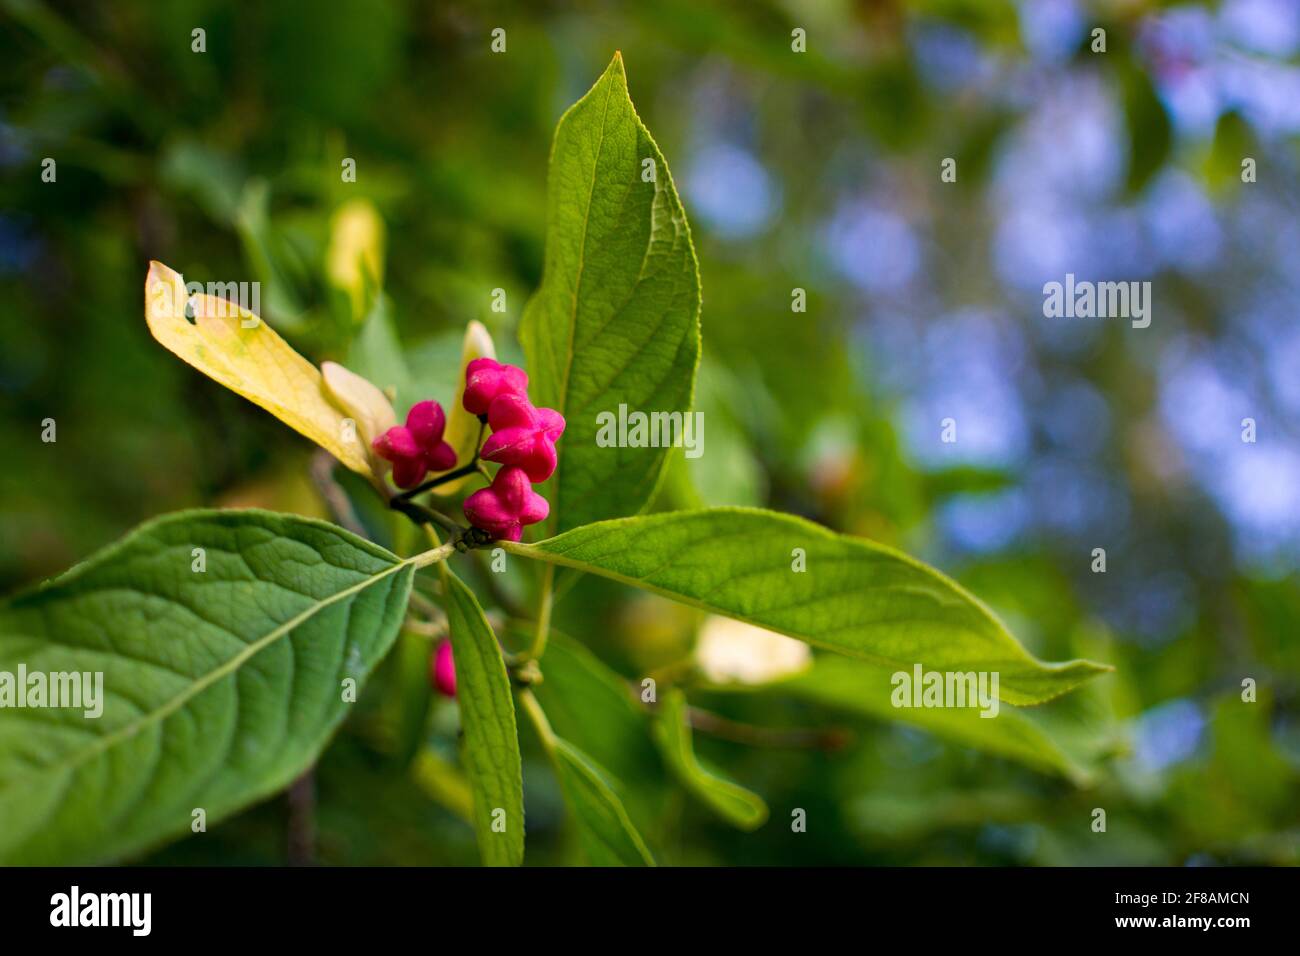 flowers of euonymus on a branch against foliage Stock Photo